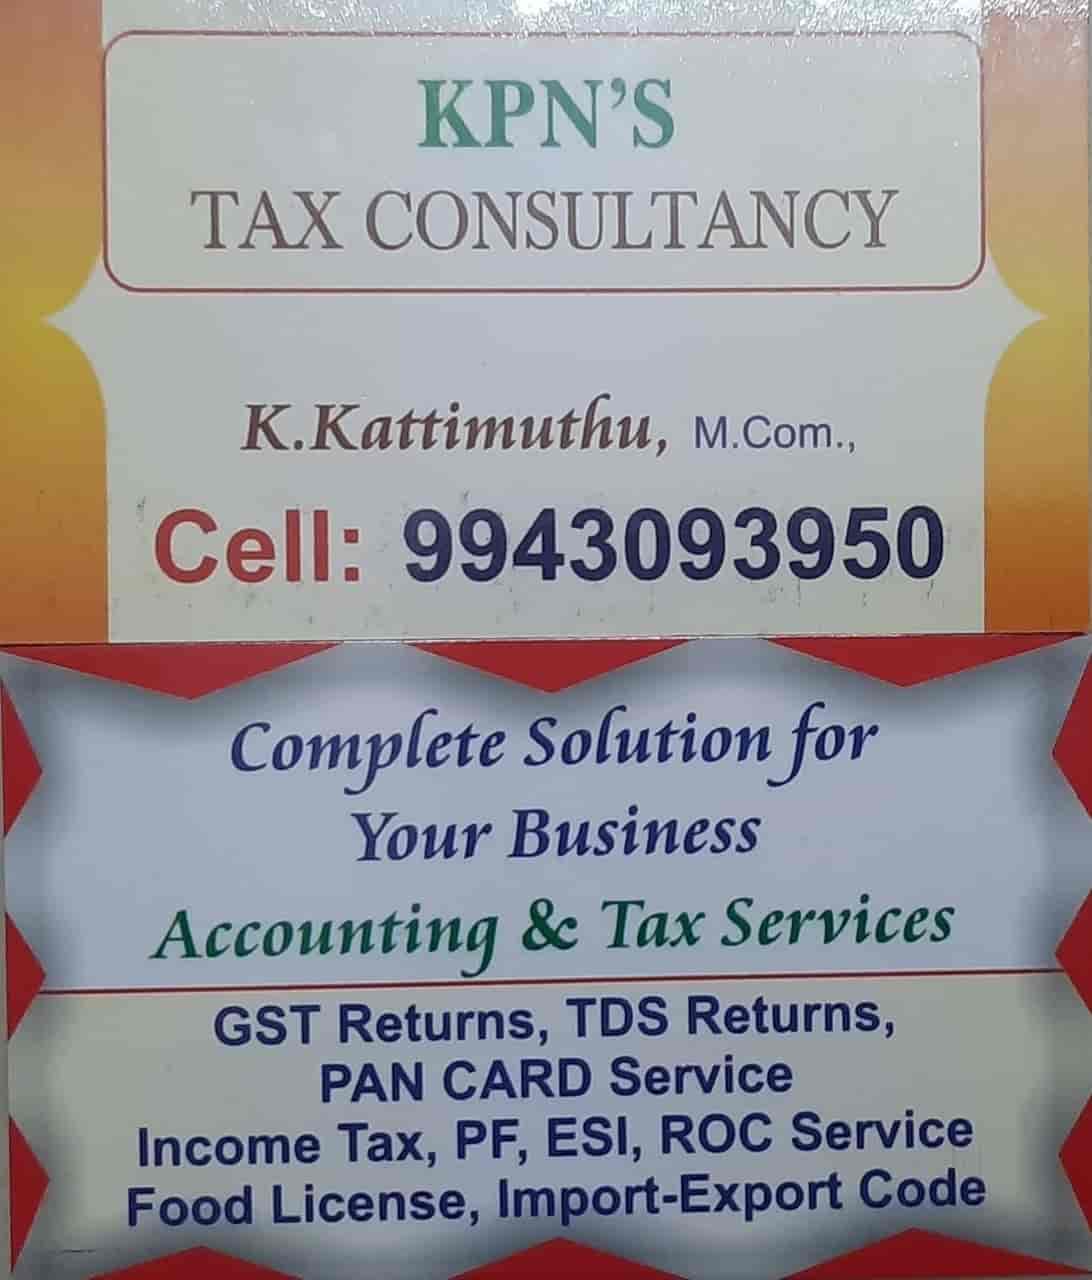 KPNS TAX CONSULTANCY Professional Services | Accounting Services